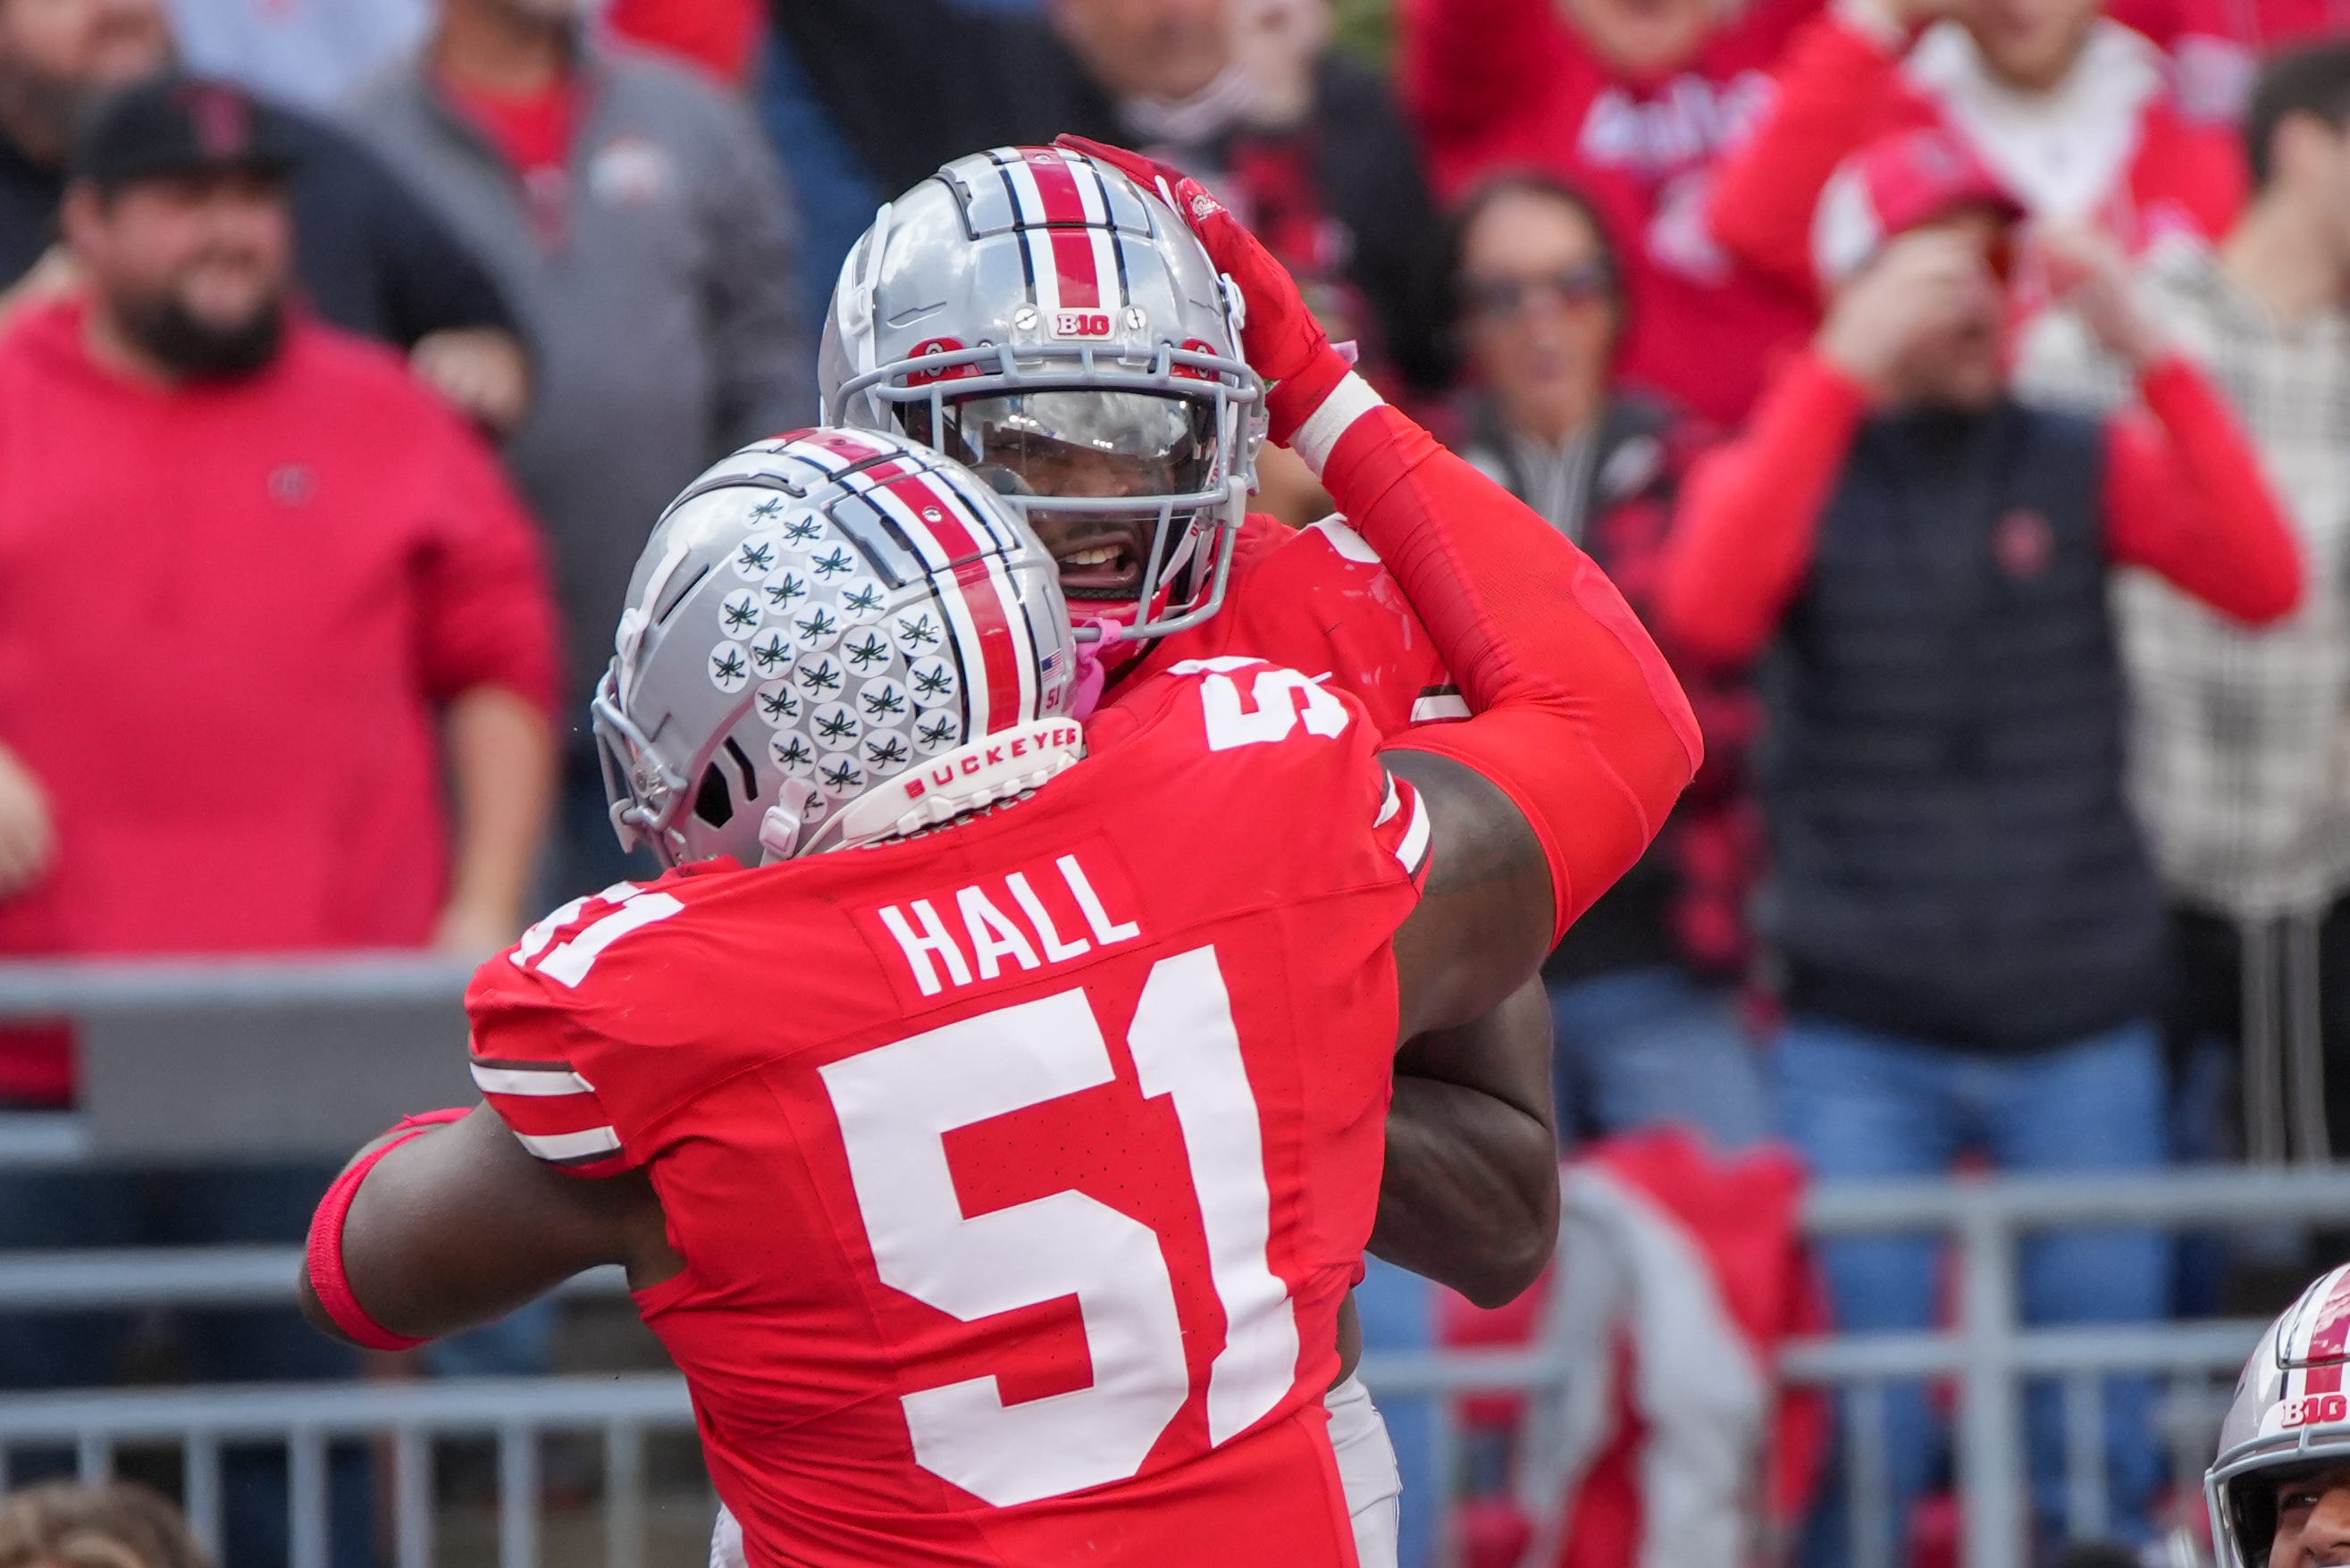 Oct 7, 2023; Ohio Stadium, Ohio, USA;
Ohio State Buckeyes safety Josh Proctor (41) celebrates with defensive tackle Michael Hall Jr. (51) after intercepting the ball and scoring a touchdown during their game against the Maryland Terrapins on Saturday, Oct. 7, 2023.